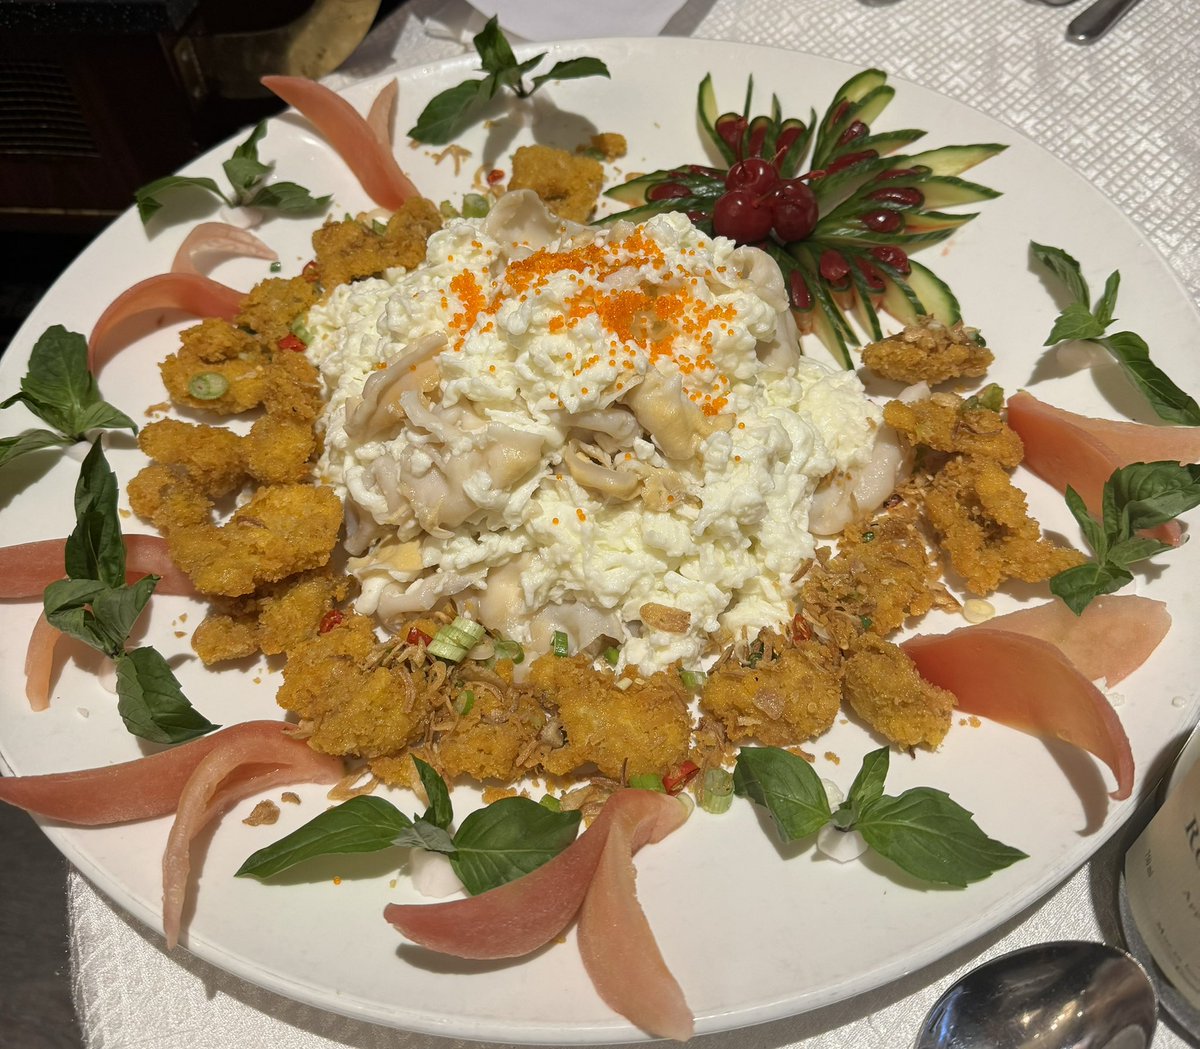 See my latest review of Jade Seafood Restaurant in #richmondbc. #richmondfoodie #richmondeats #richmondrestaurants #restaurantreviews. youtu.be/Rro3zyl8QvQ?si…